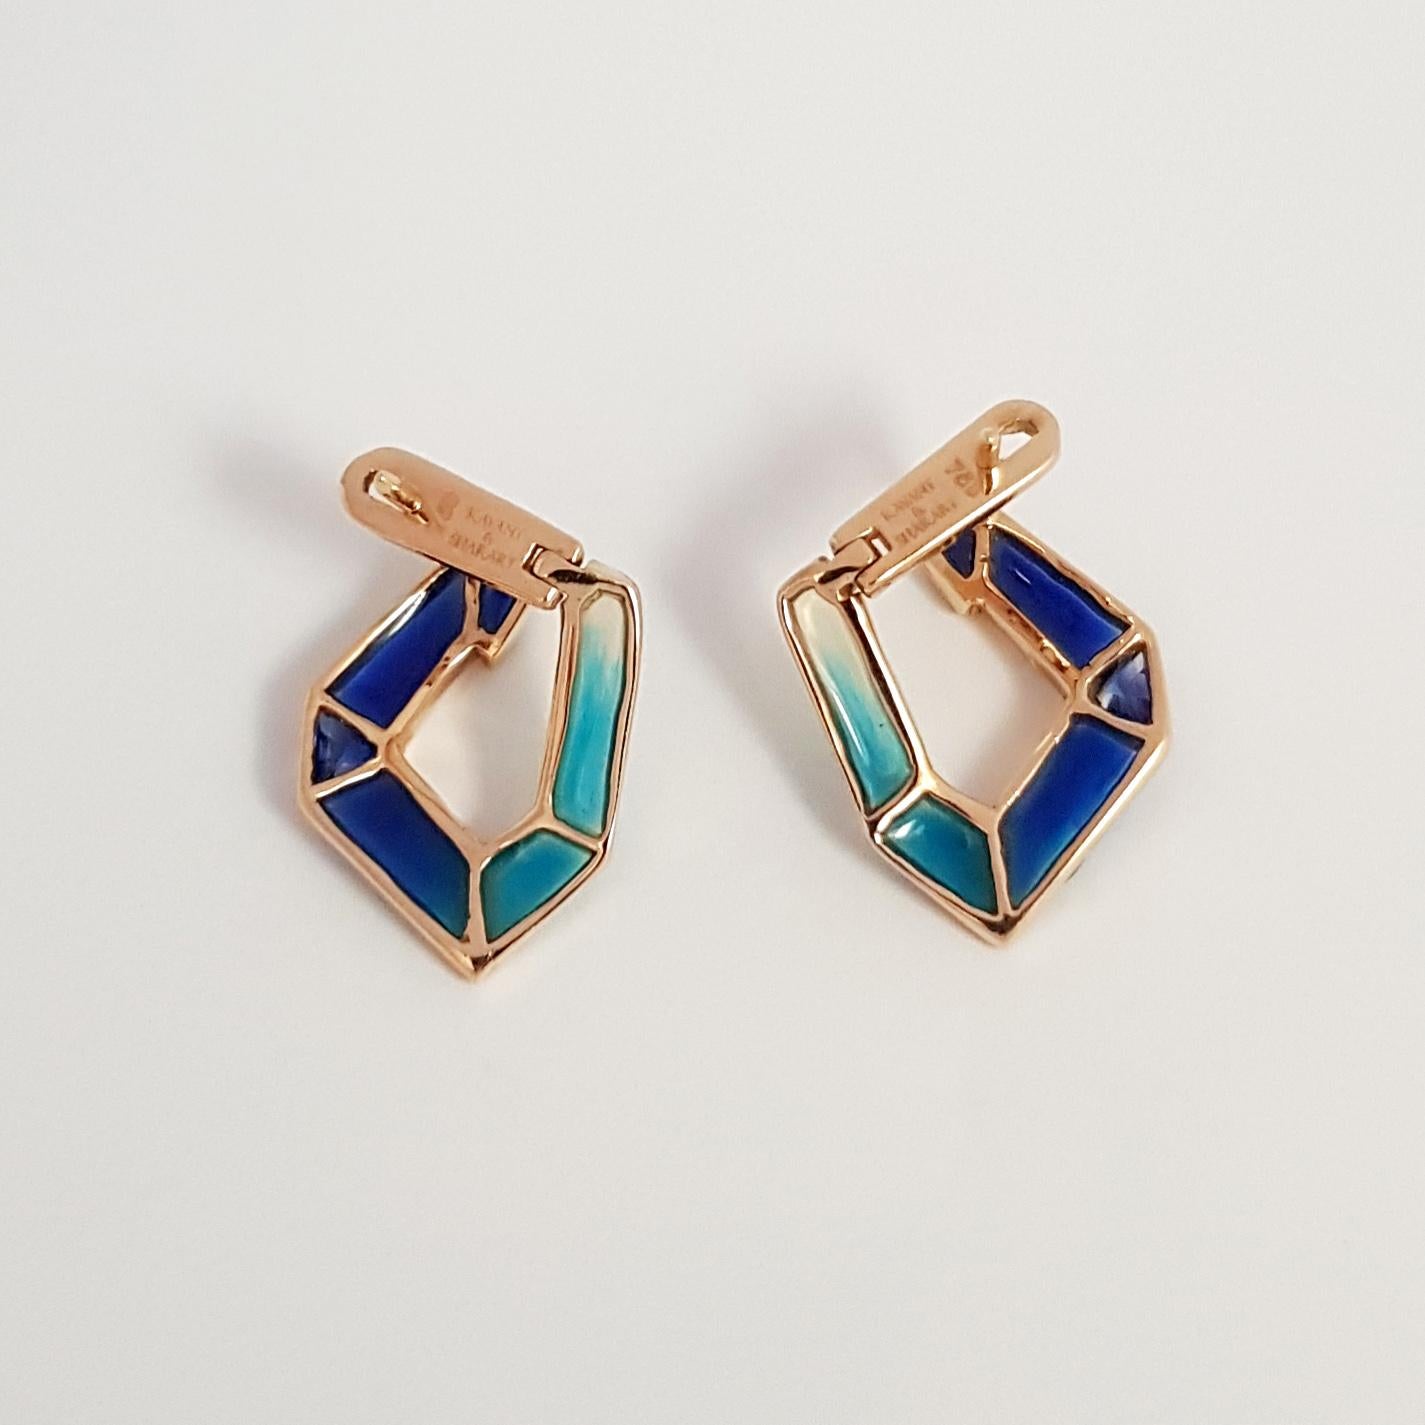 Origami Link No. 5 Blue Sapphire with Enamel Earrings 18K Rose Gold Petite For Sale 1